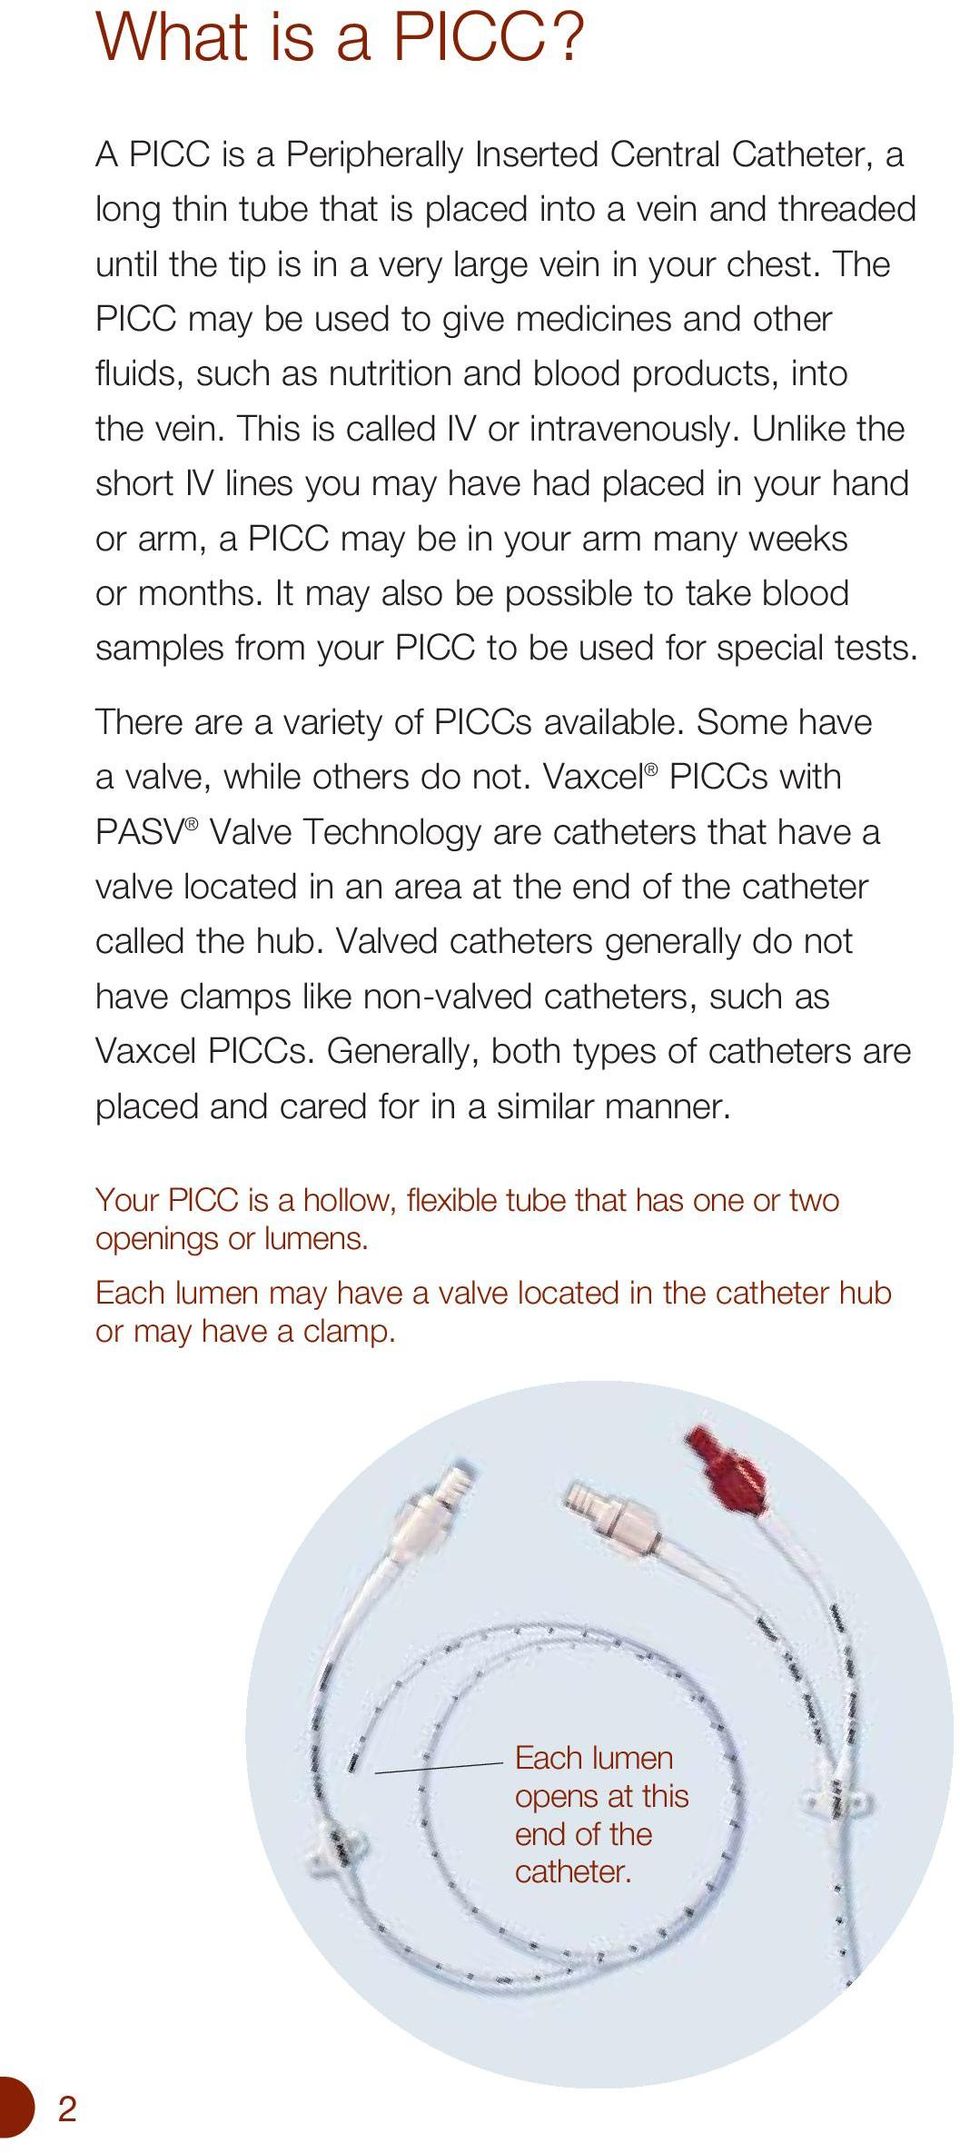 Unlike the short IV lines you may have had placed in your hand or arm, a PICC may be in your arm many weeks or months.